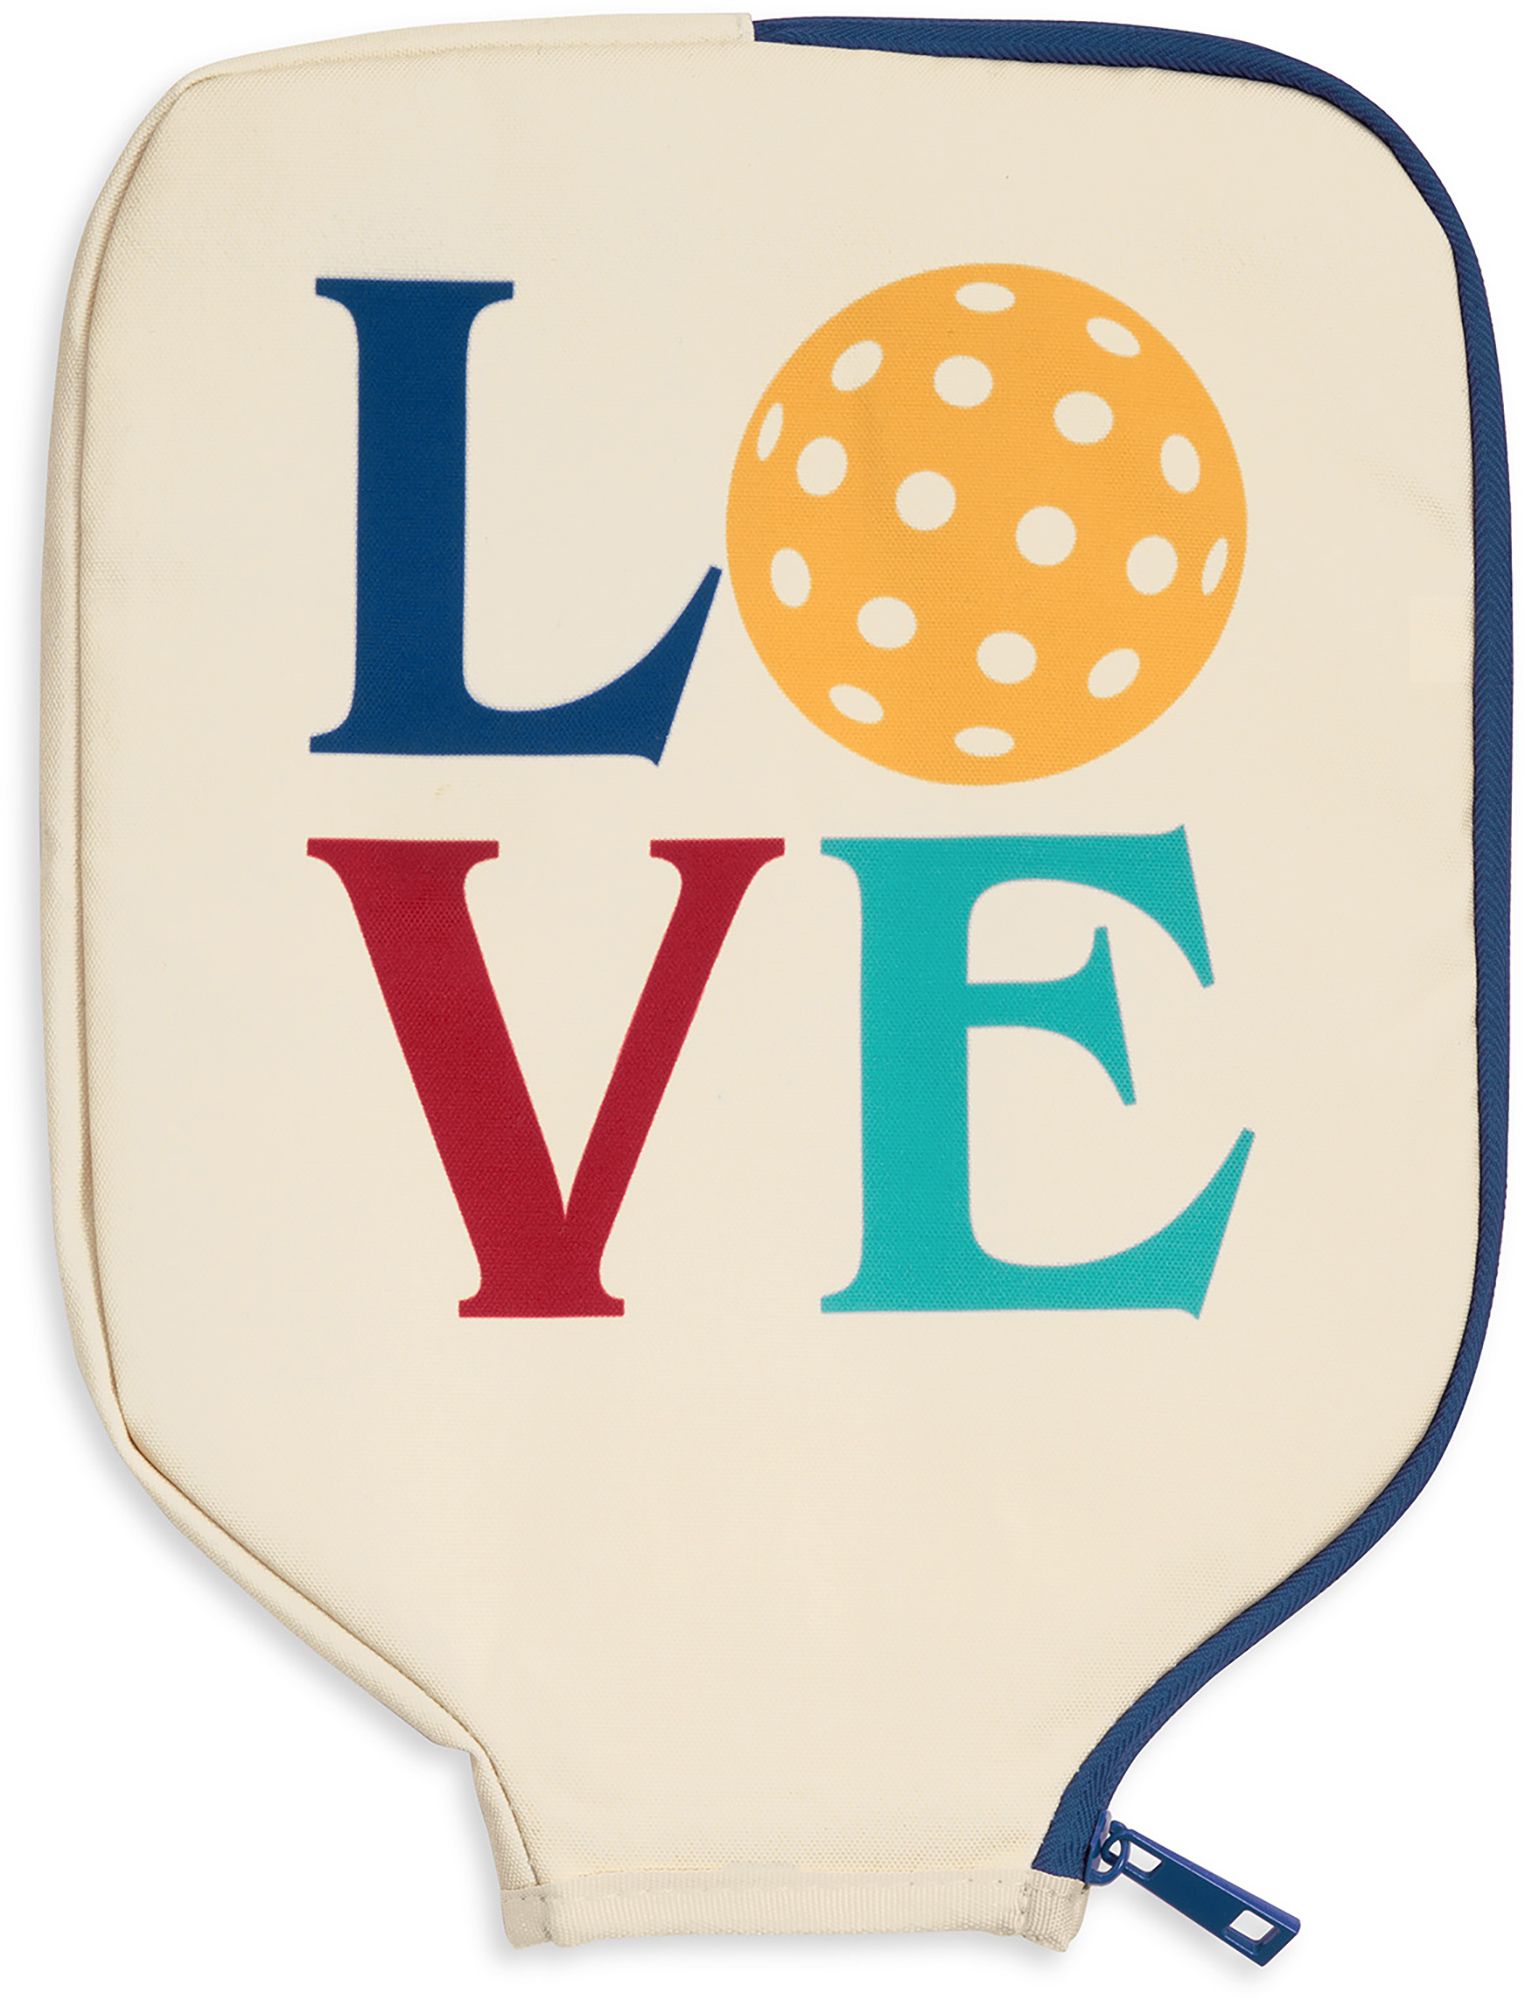 Steel Mill & Co. Love Pickleball Paddle Cover